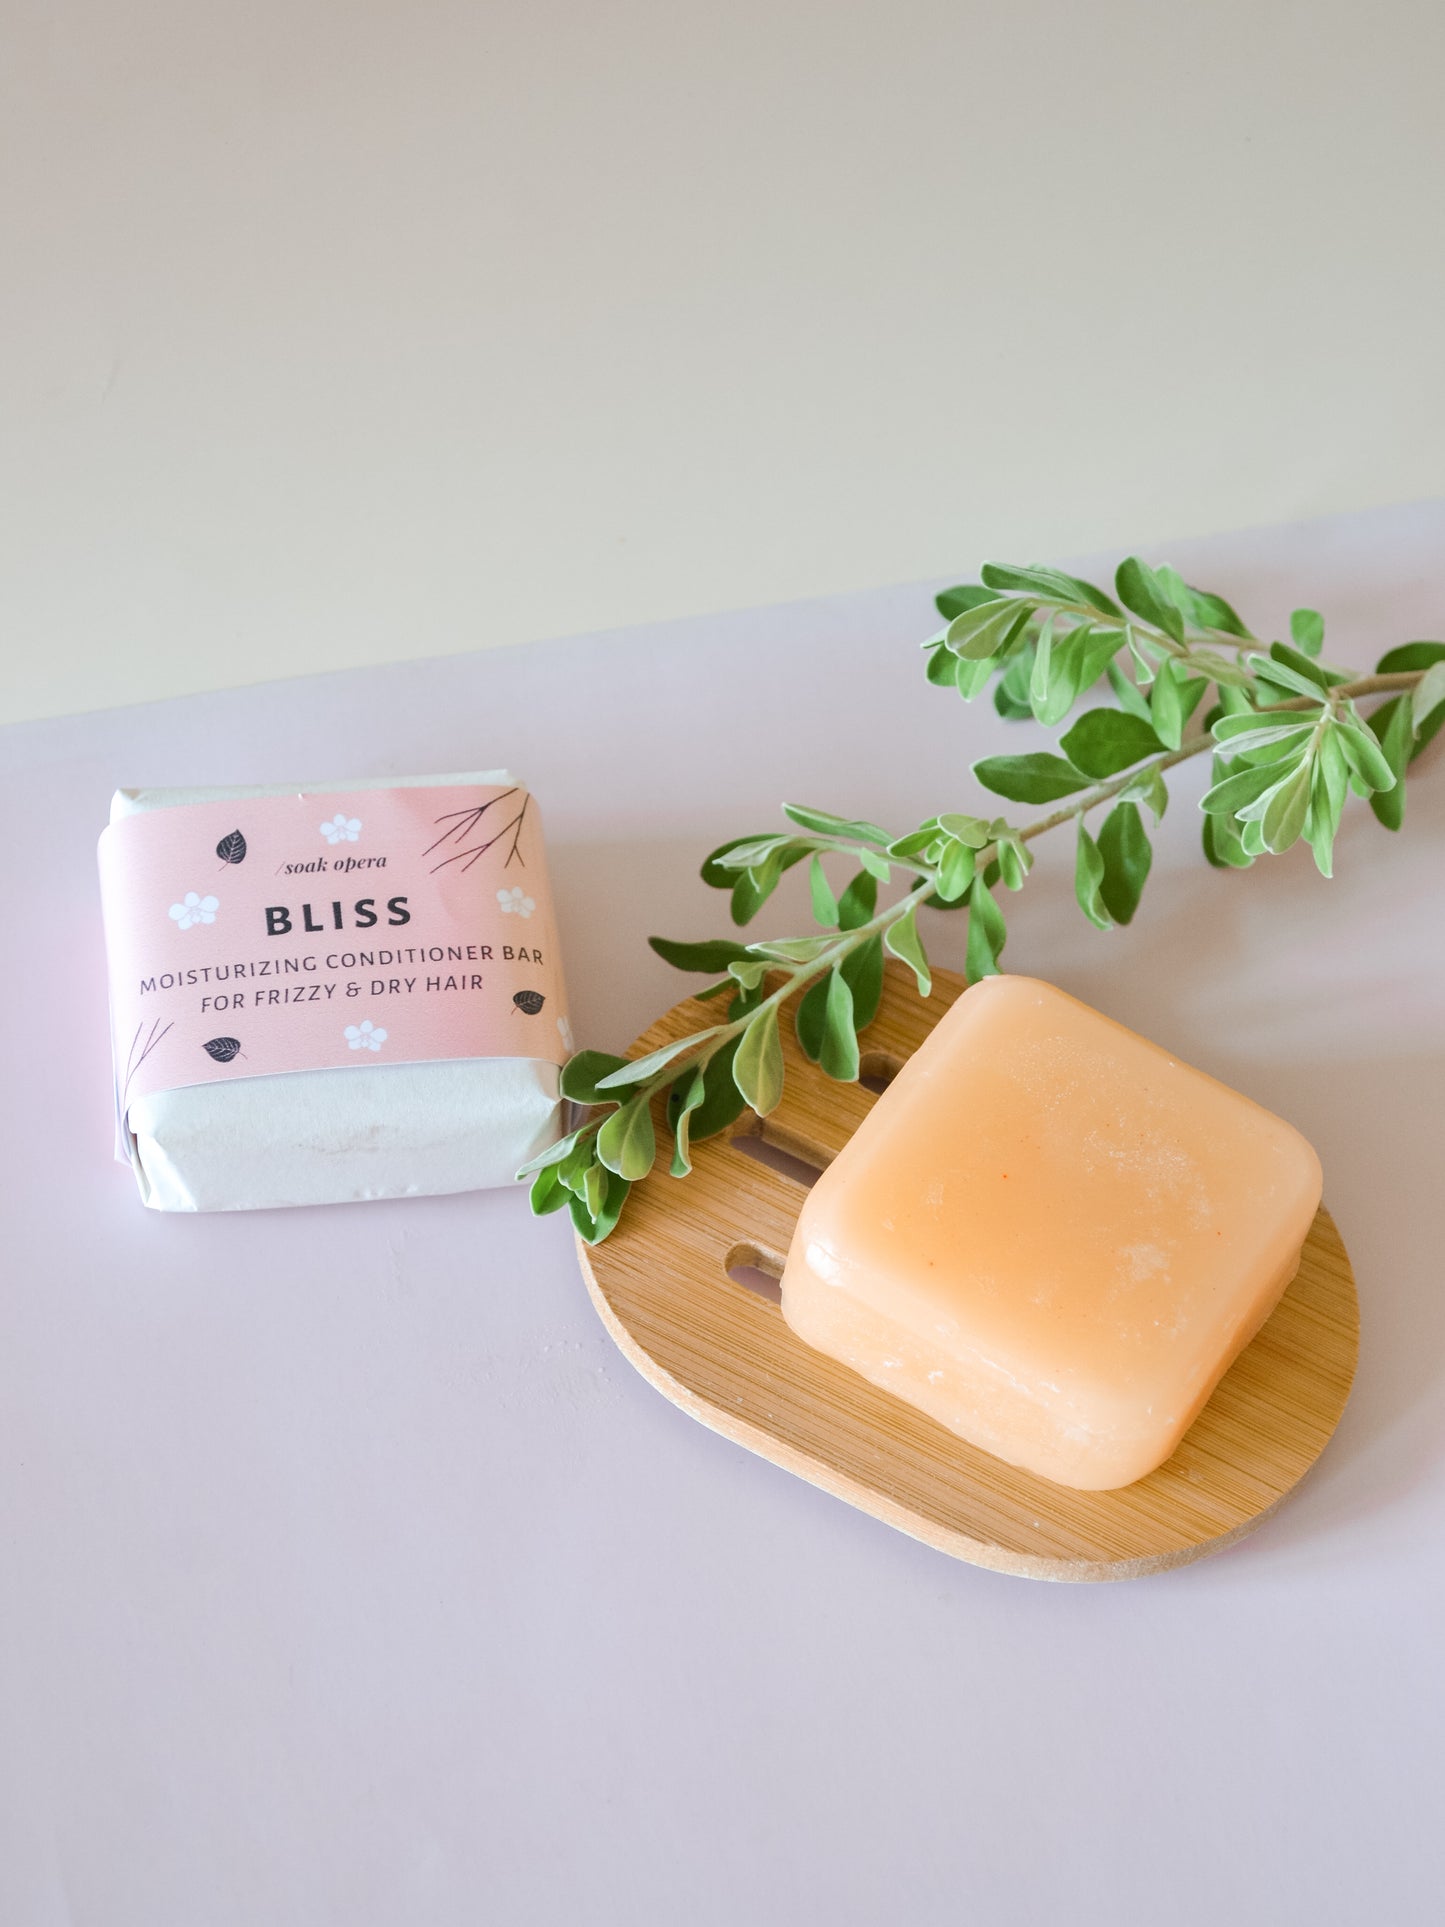 Bliss Moisturizing Conditioner Bar (for frizzy & dry hair)